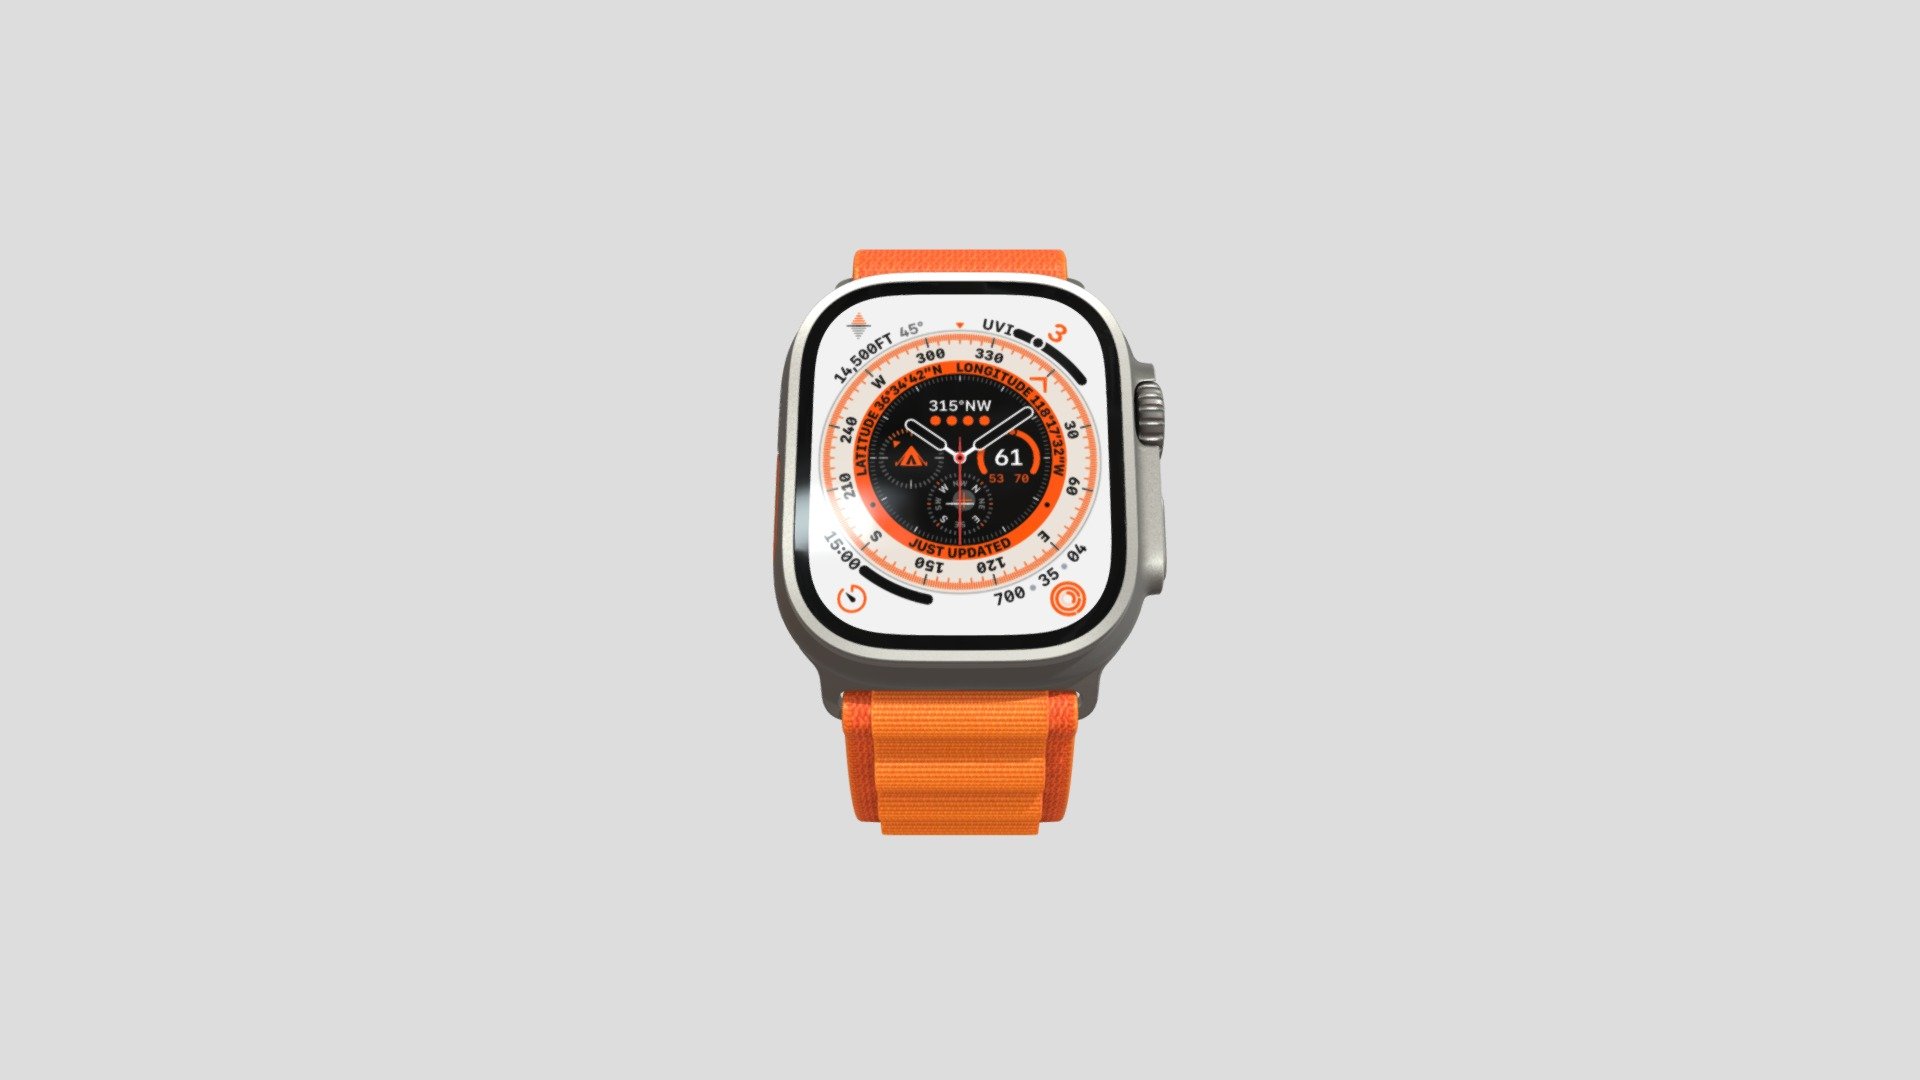 The Orange Apple Watch Ultra from the official Apple website - Apple Watch Ultra - Orange - Download Free 3D model by alboxer2000_ 3d model